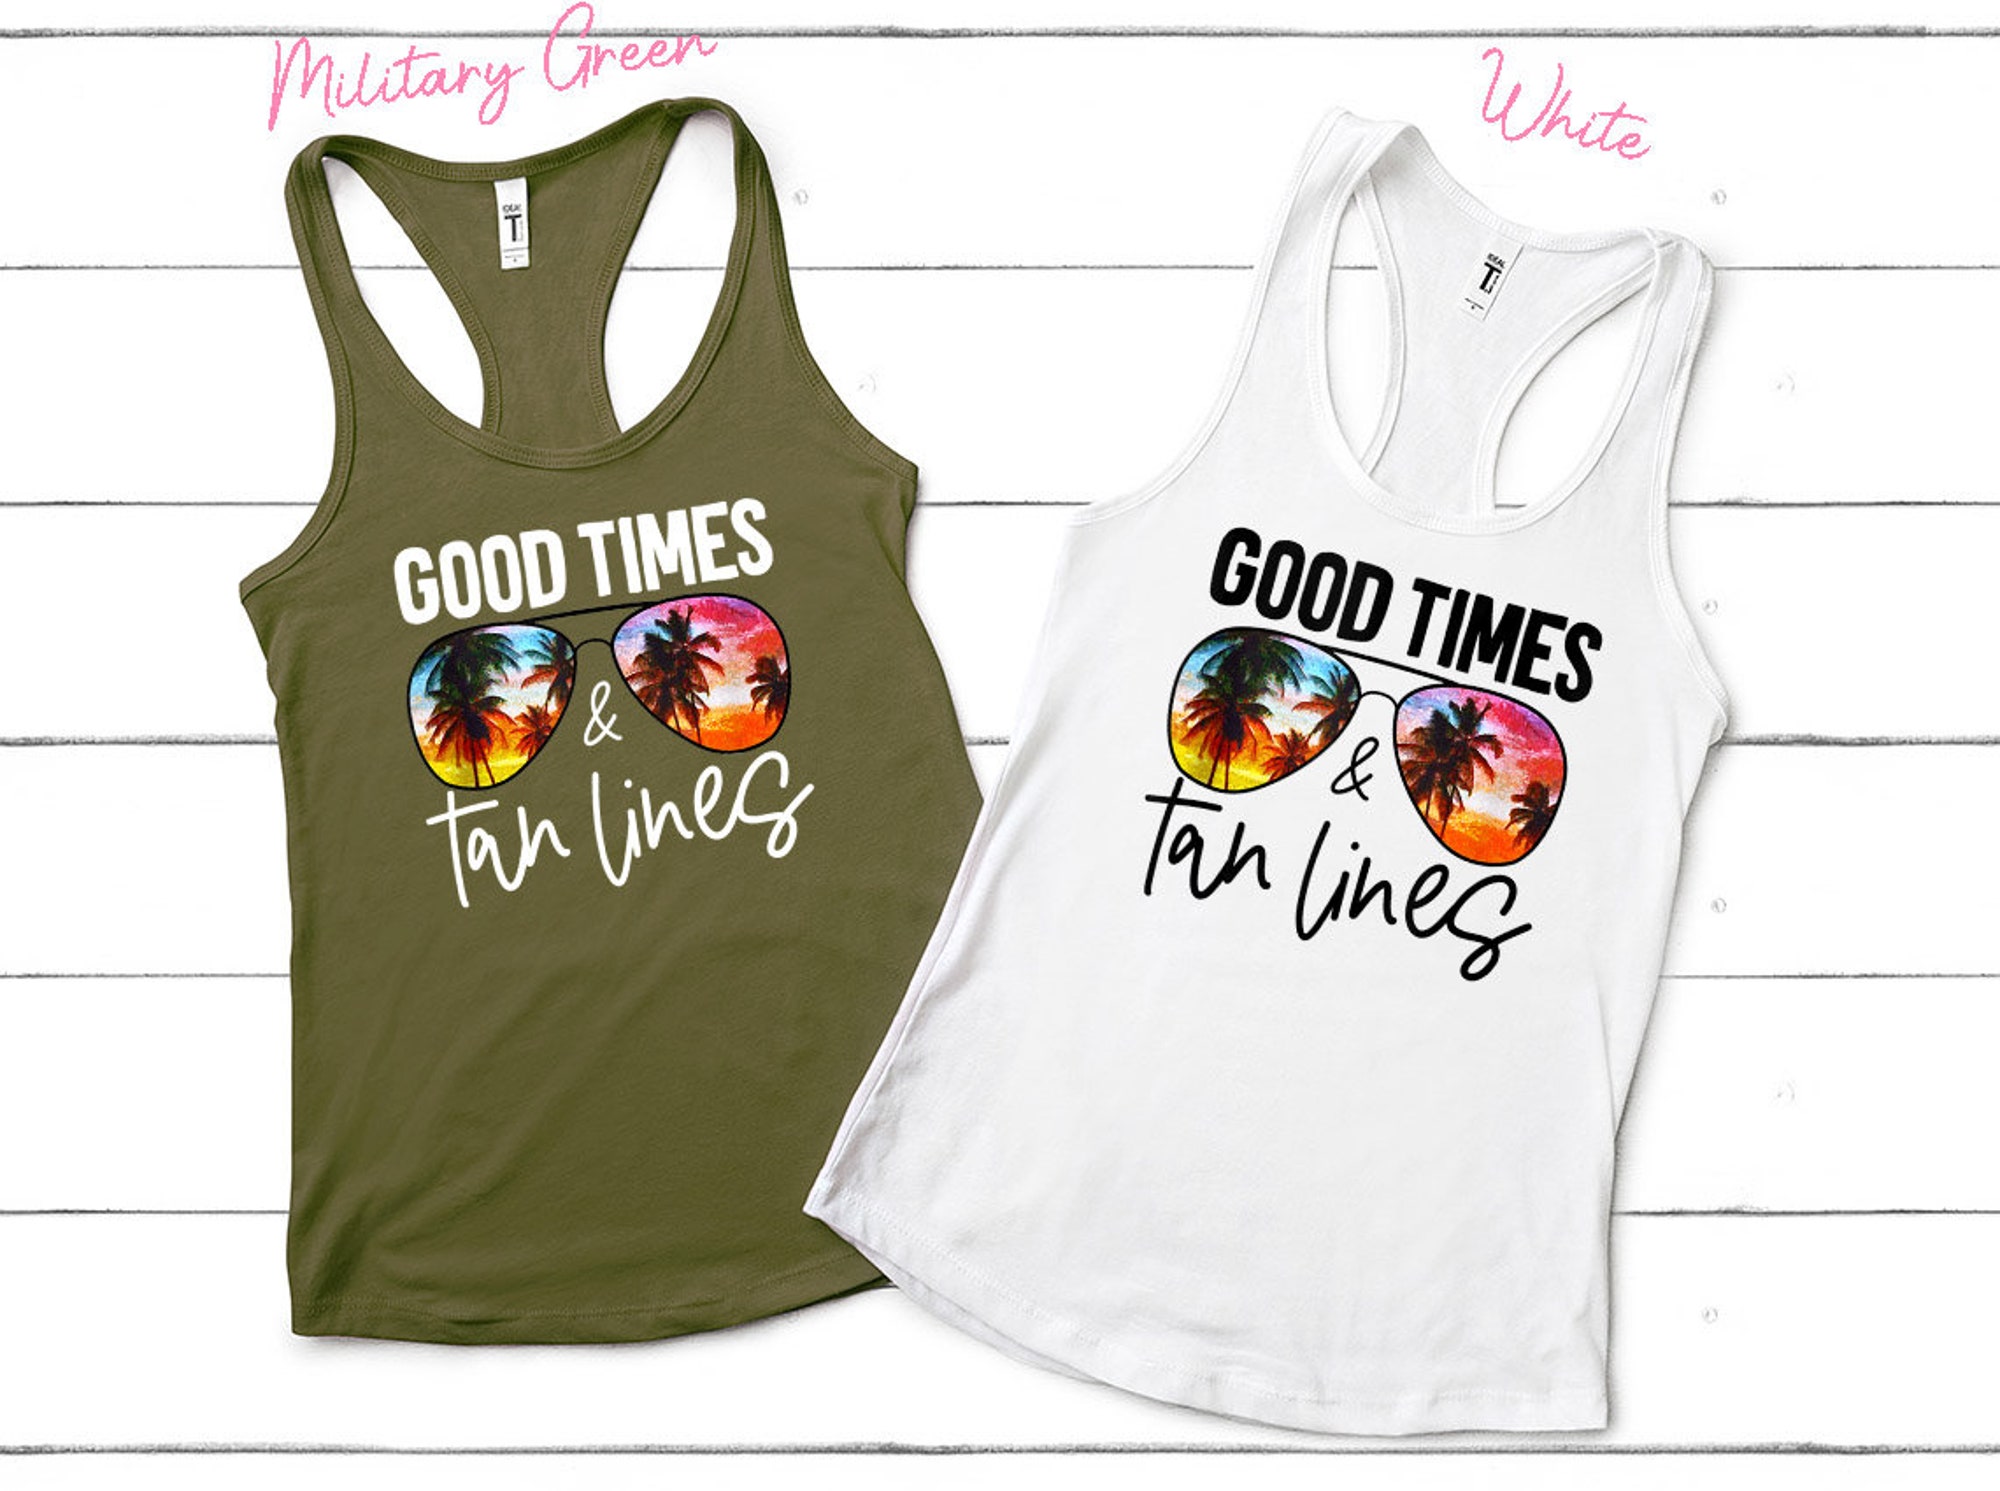 Discover Good Times Tan Lines Tank Top